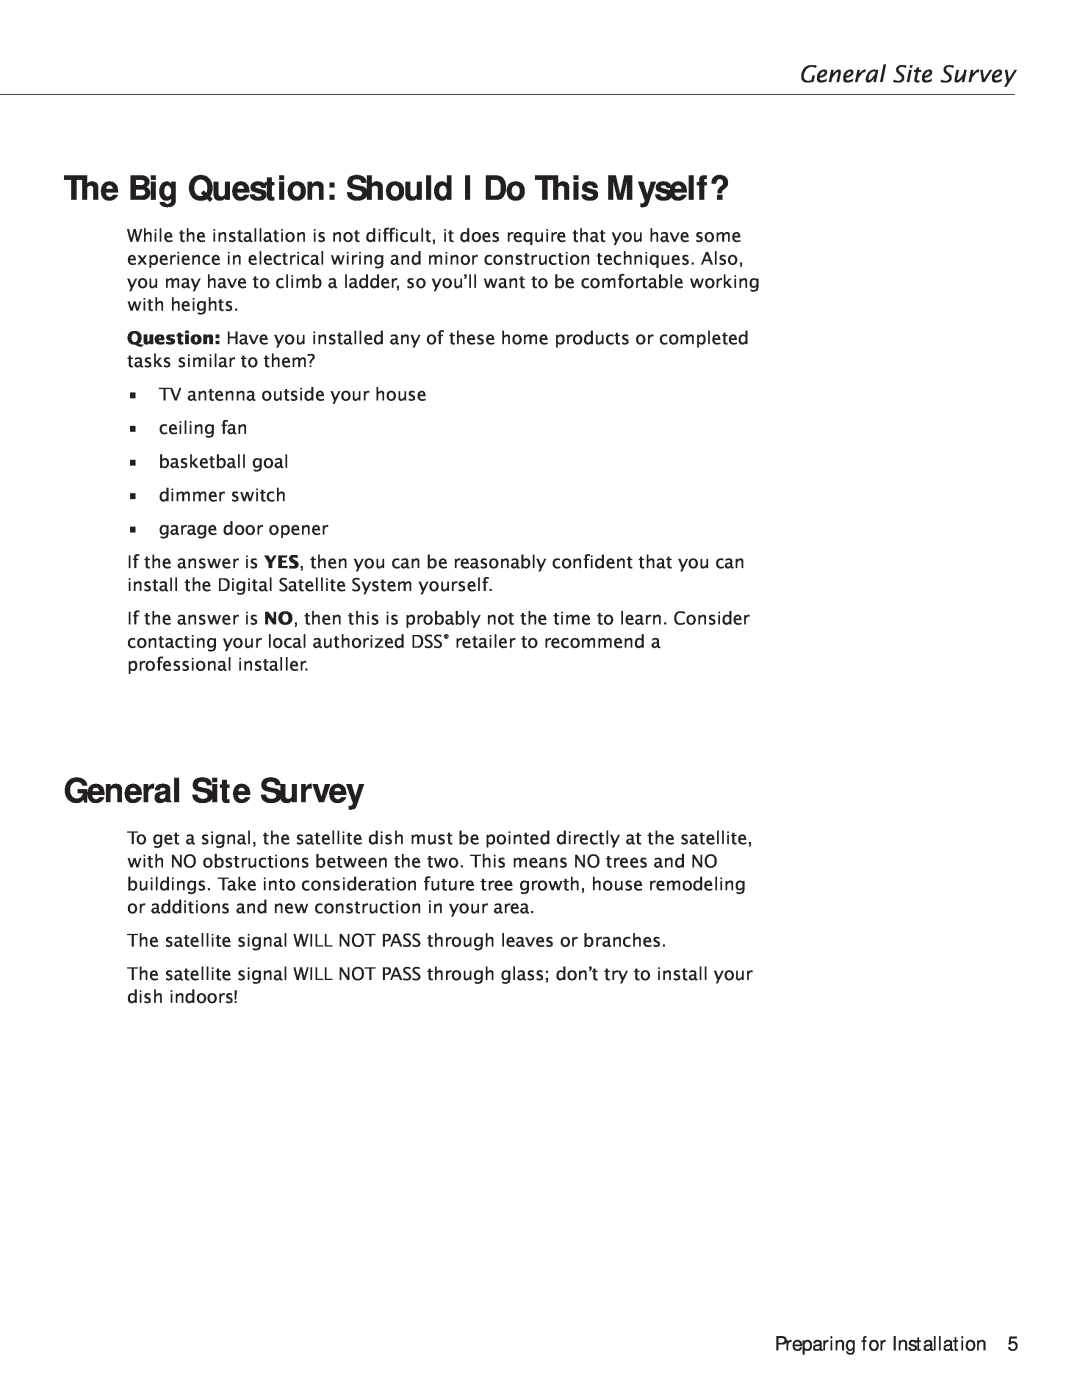 RCA Satellite TV Antenna manual The Big Question Should I Do This Myself?, General Site Survey, Preparing for Installation 